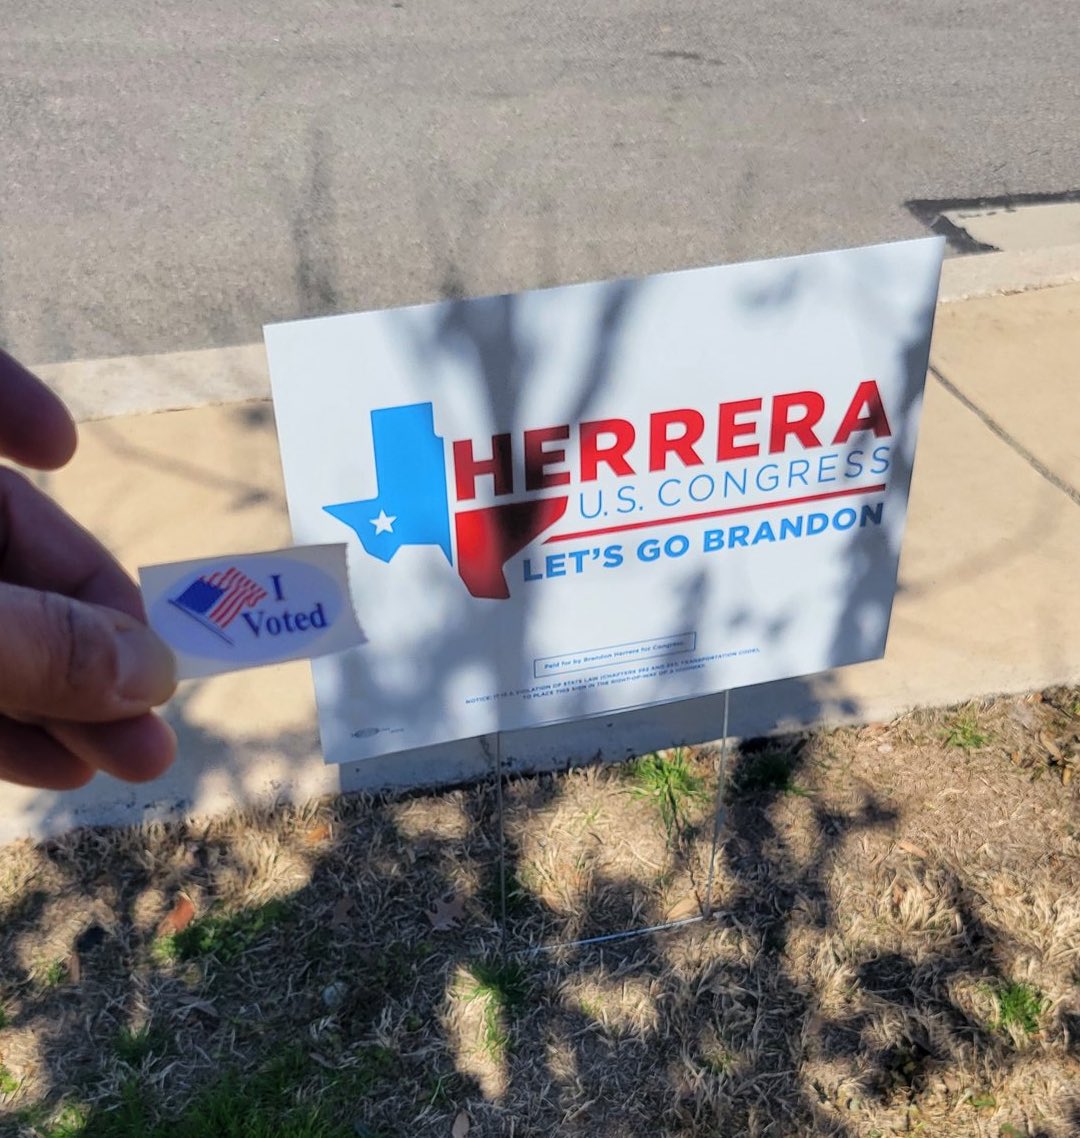 It has begun. Early voting in Texas started Feb 20th, and the Primary is on March 5th! Let’s win this together 💪🇺🇸